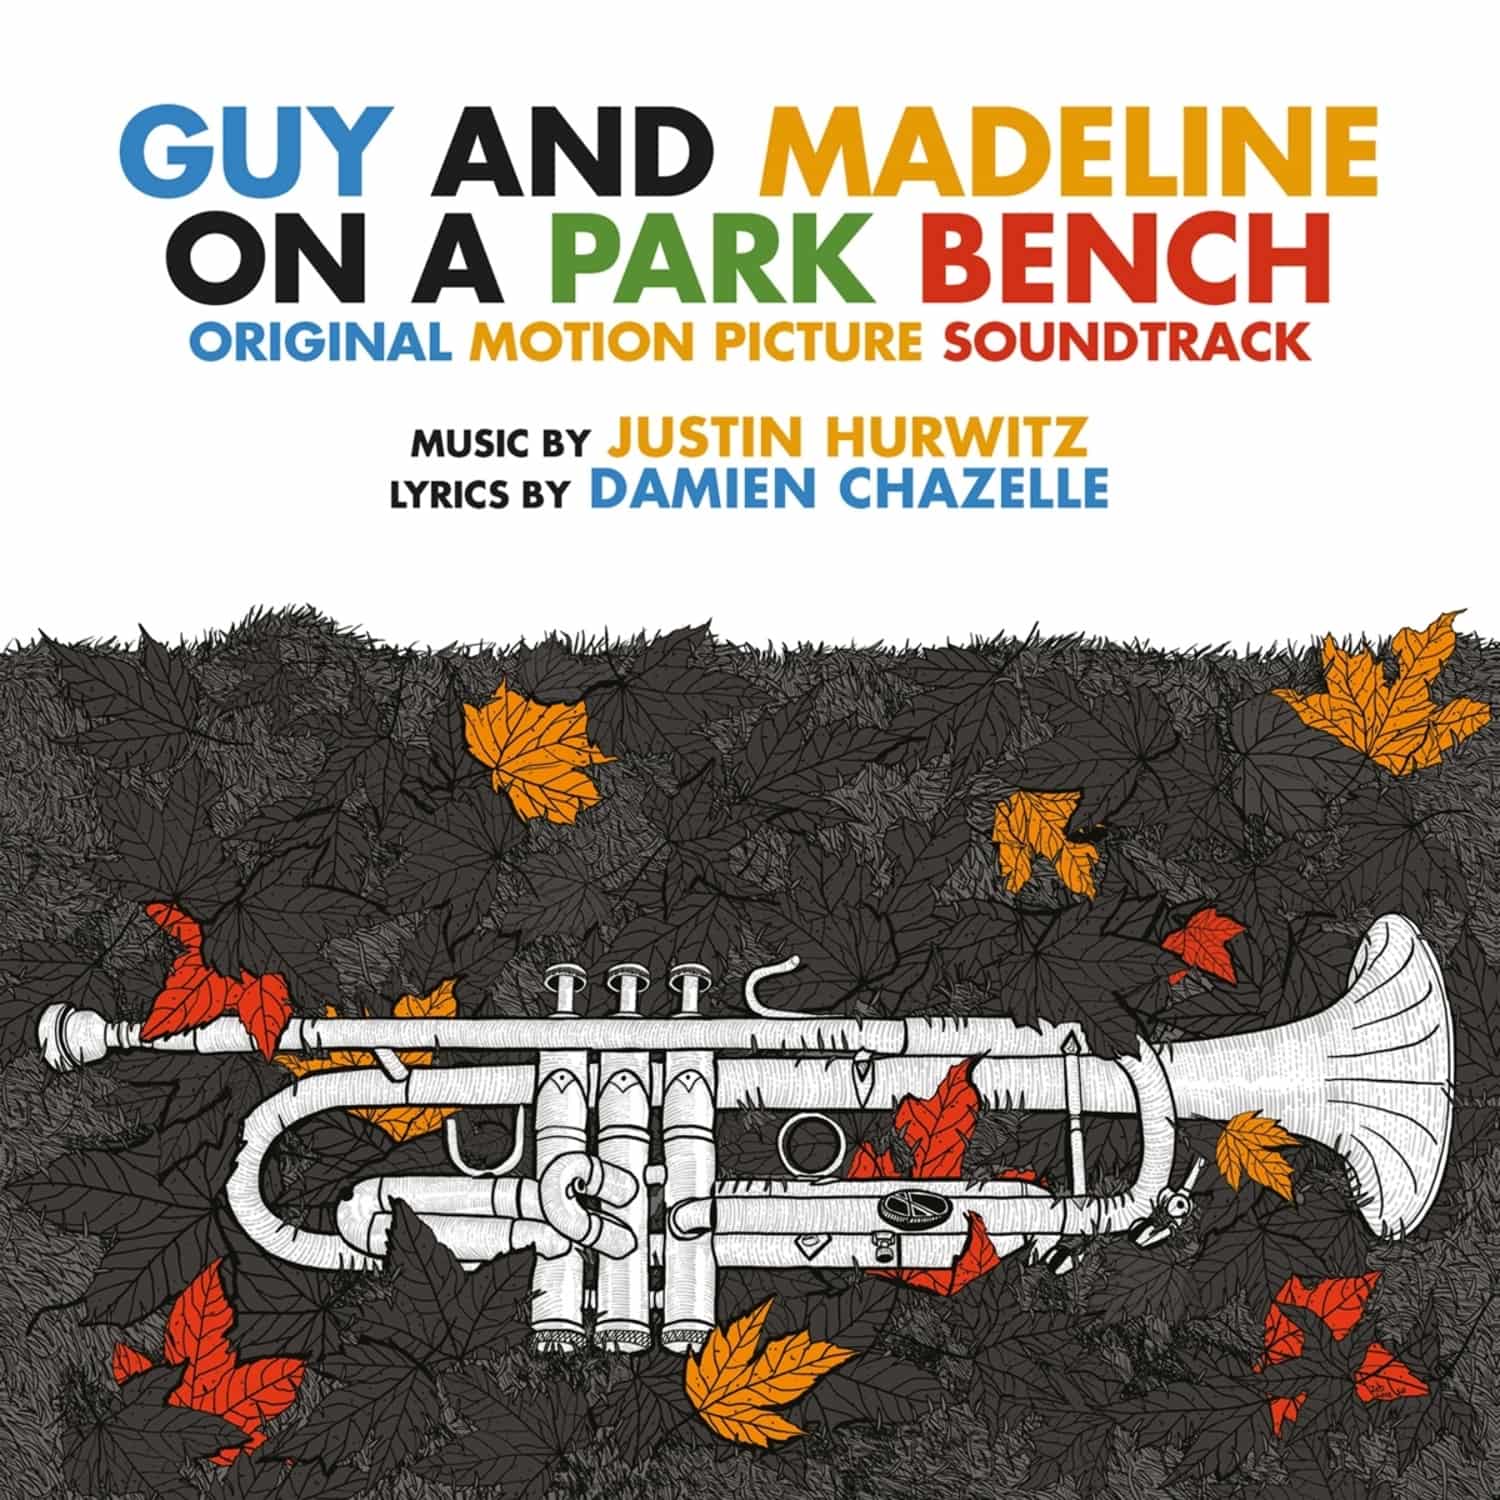 Ost - GUY AND MADELINE ON A PARK BENCH 